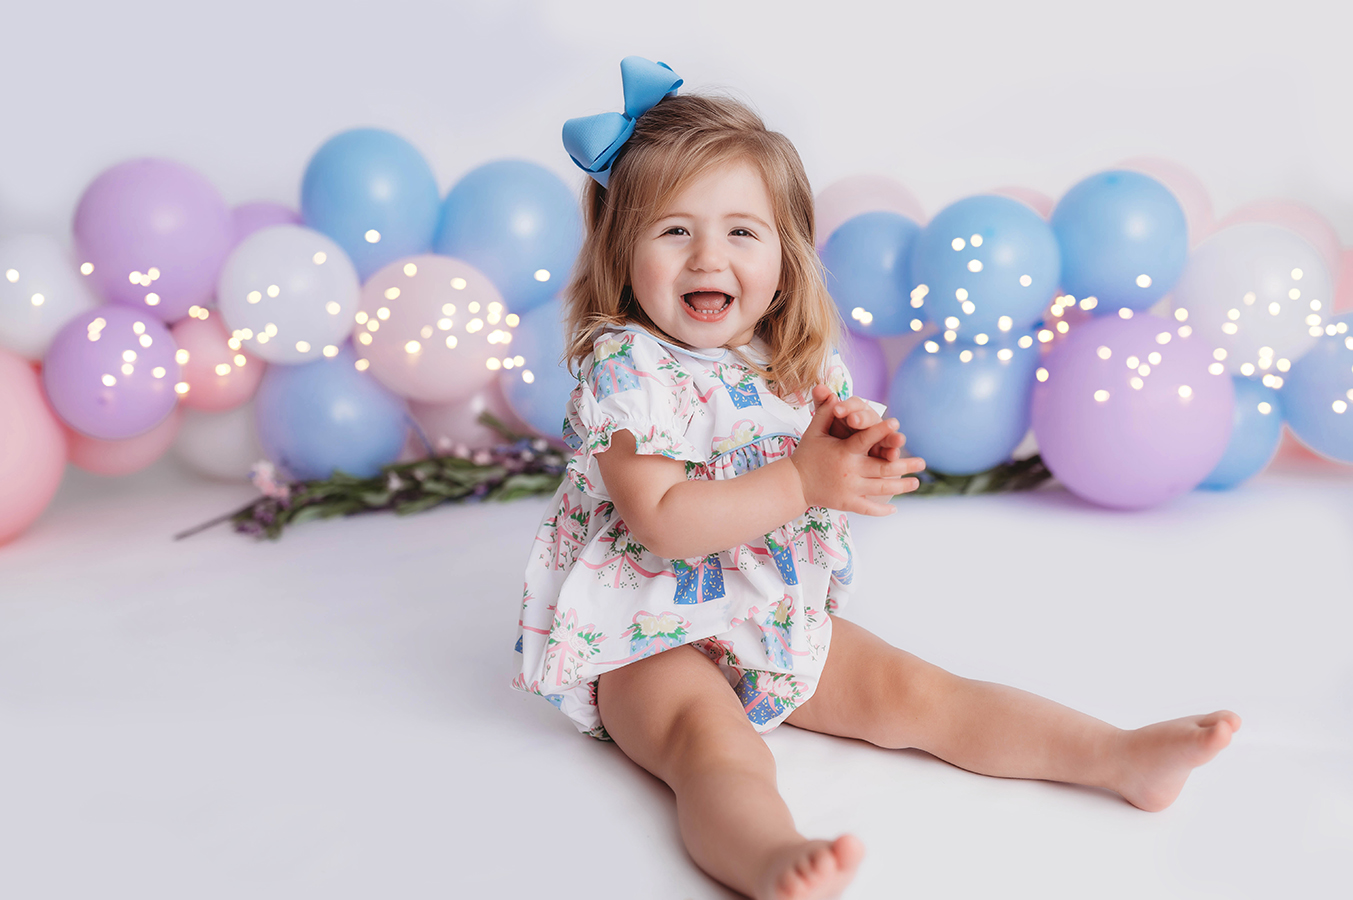 Baby Celebrates Birthday with a Cake Smash Photo Session in Asheville, NC Baby Photography Studio.